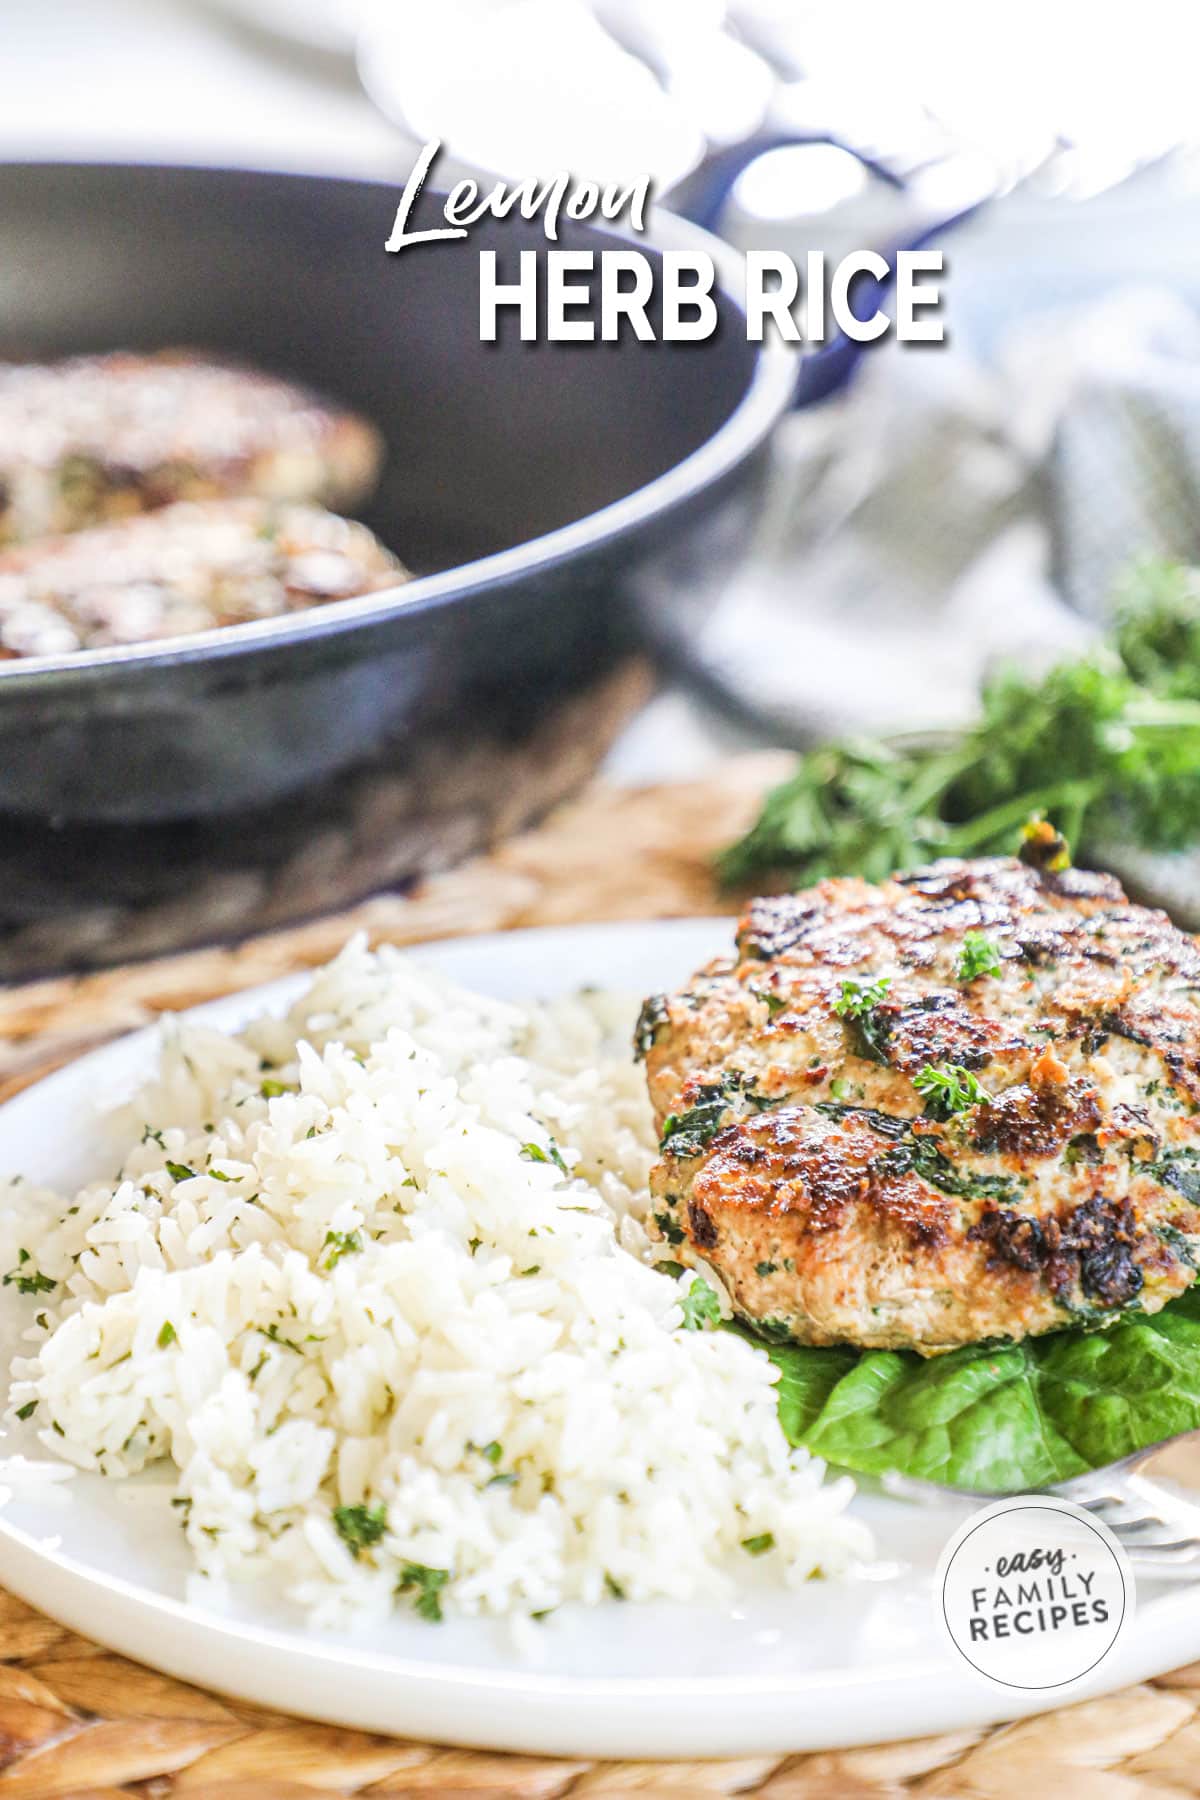 a plate piled with lemon herb rice, lettuce, and grilled chicken.